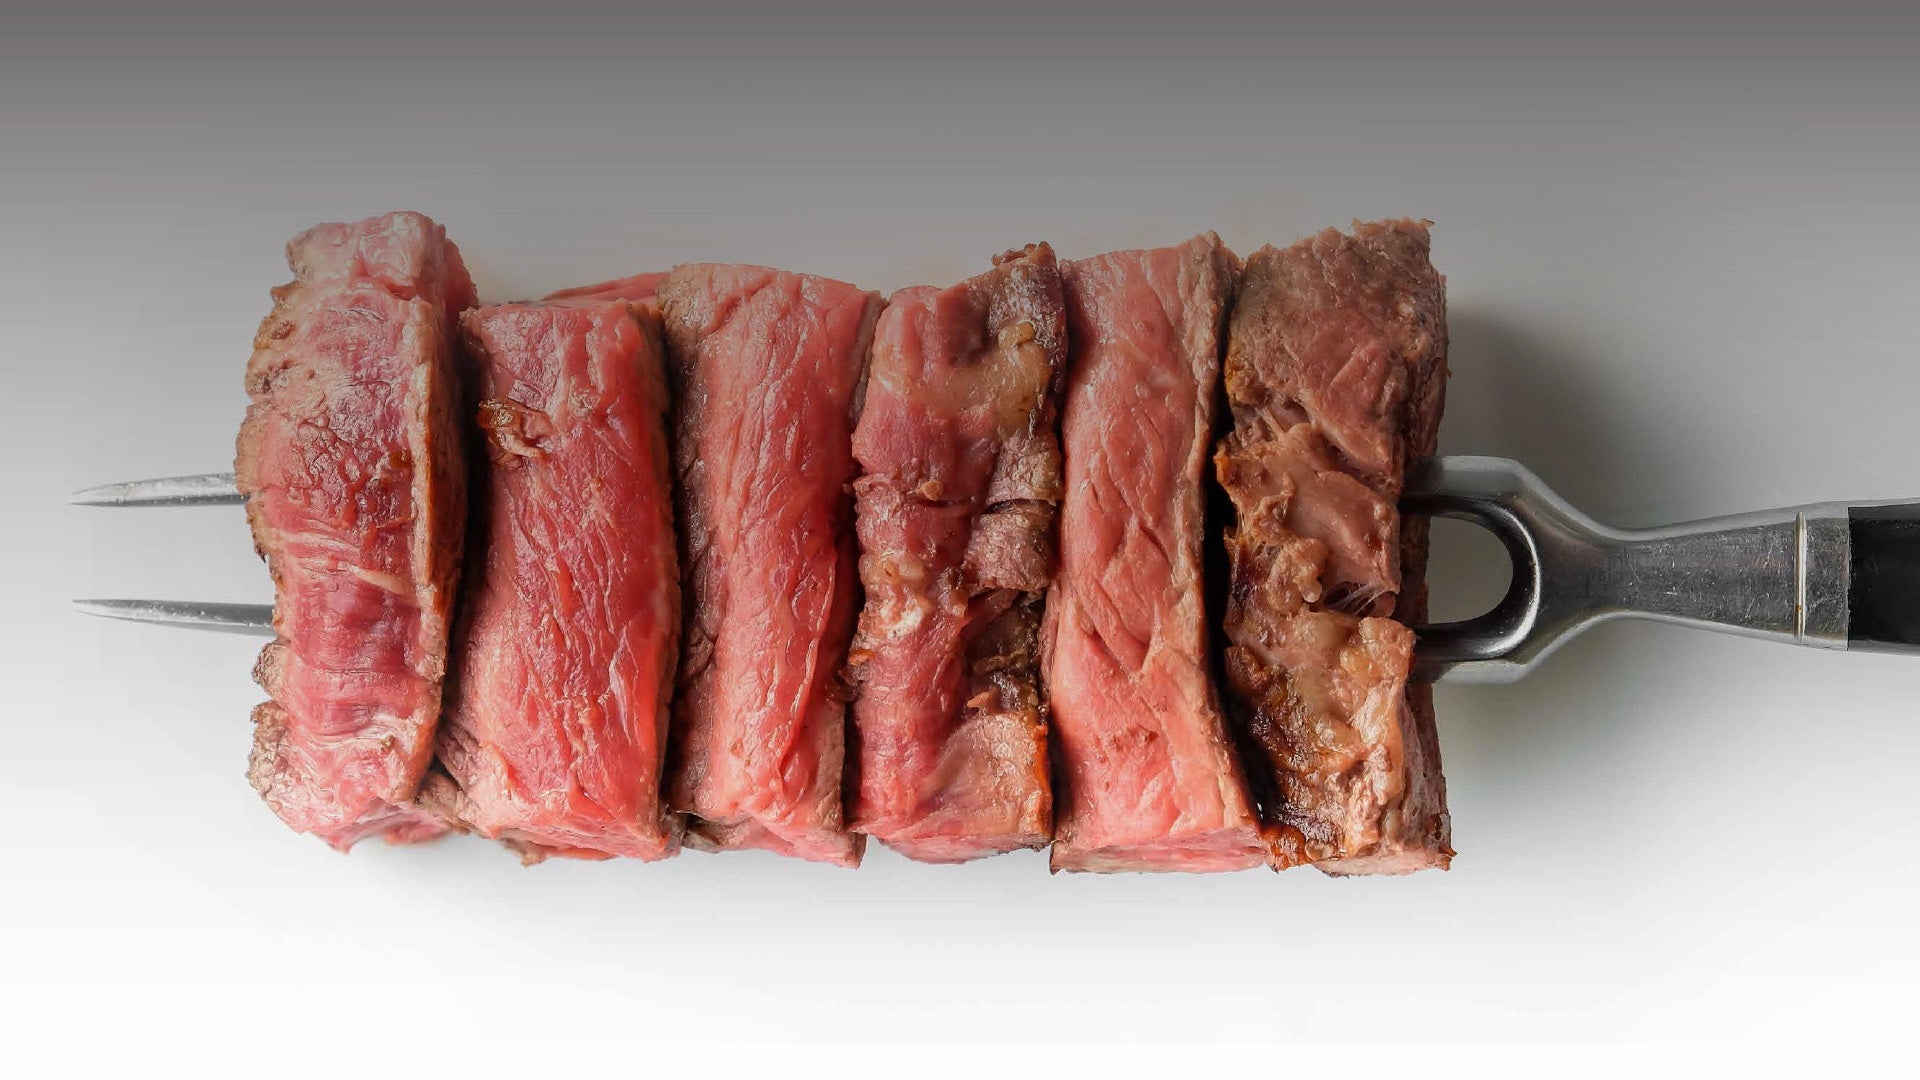 Steak Doneness Guide: Temperatures, Tips, and Timing